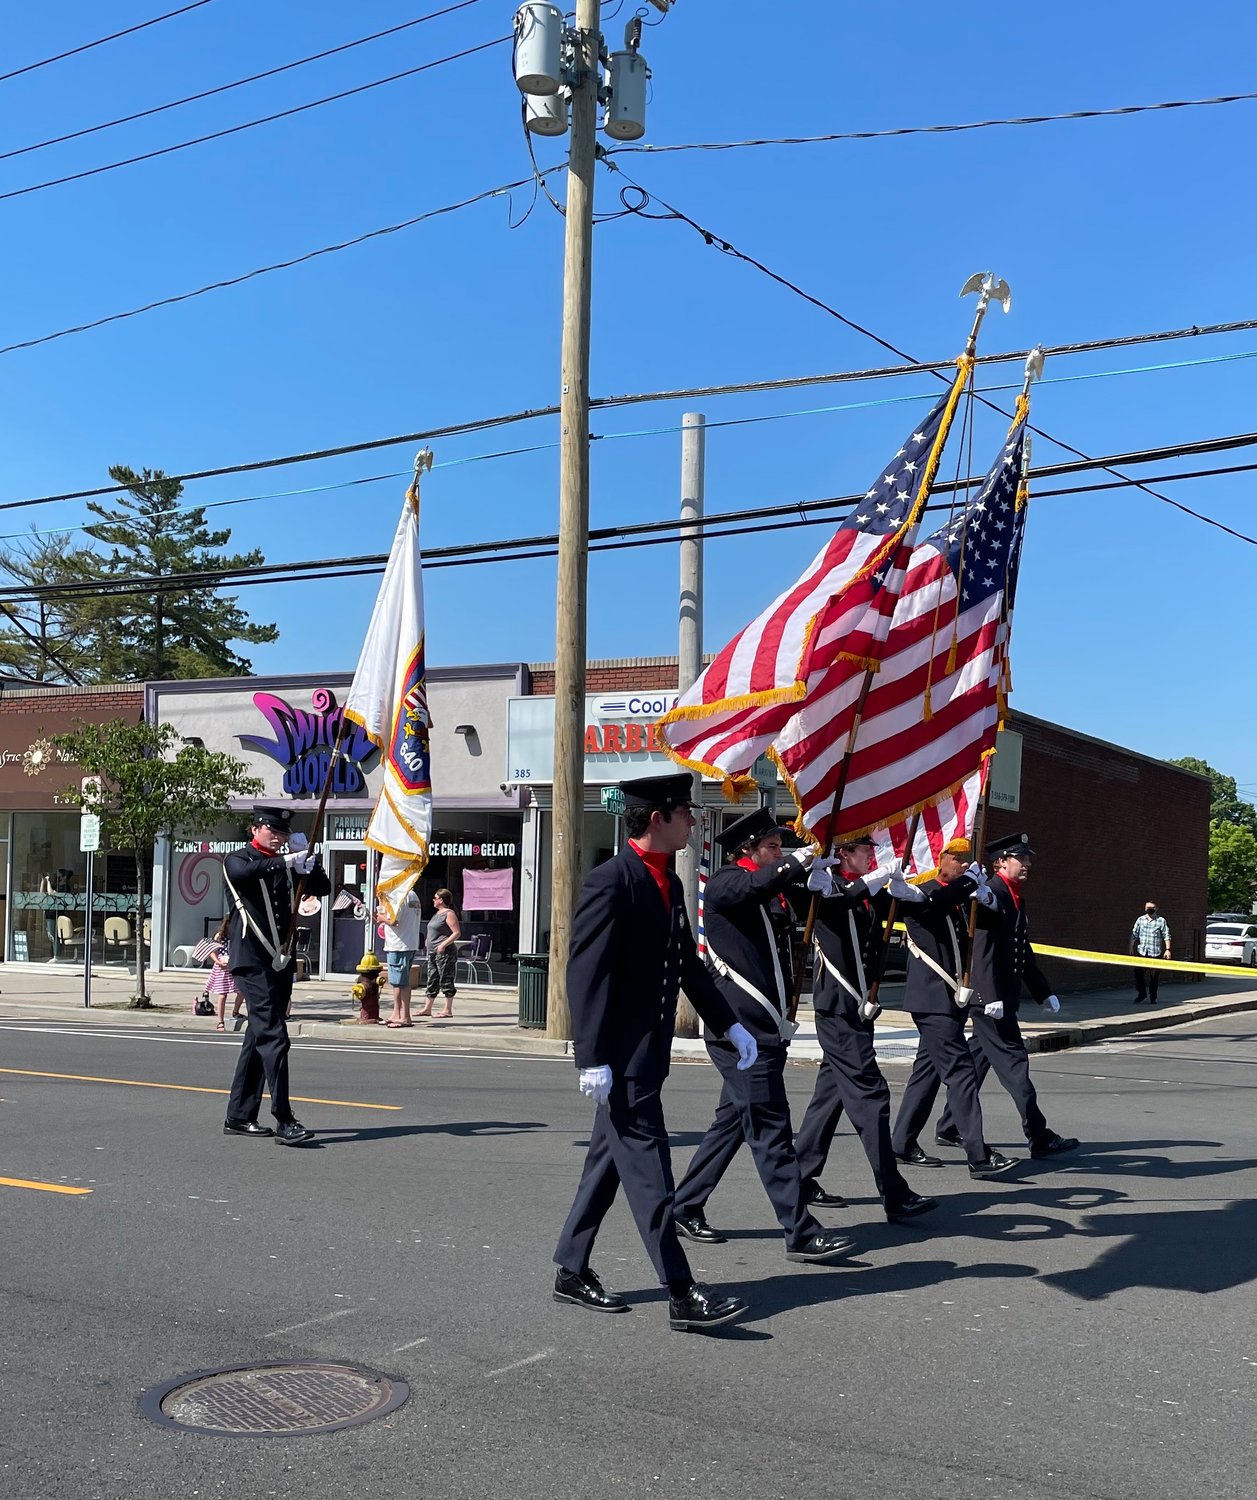 The Merrick Fire Department is ready to host the Sixth Battalion Parade & Drill this weekend, featuring all of Bellmore-Merrick’s fire departments. Above, the Merrick F.D. took part in Merrick’s Memorial Day Parade earlier this year.